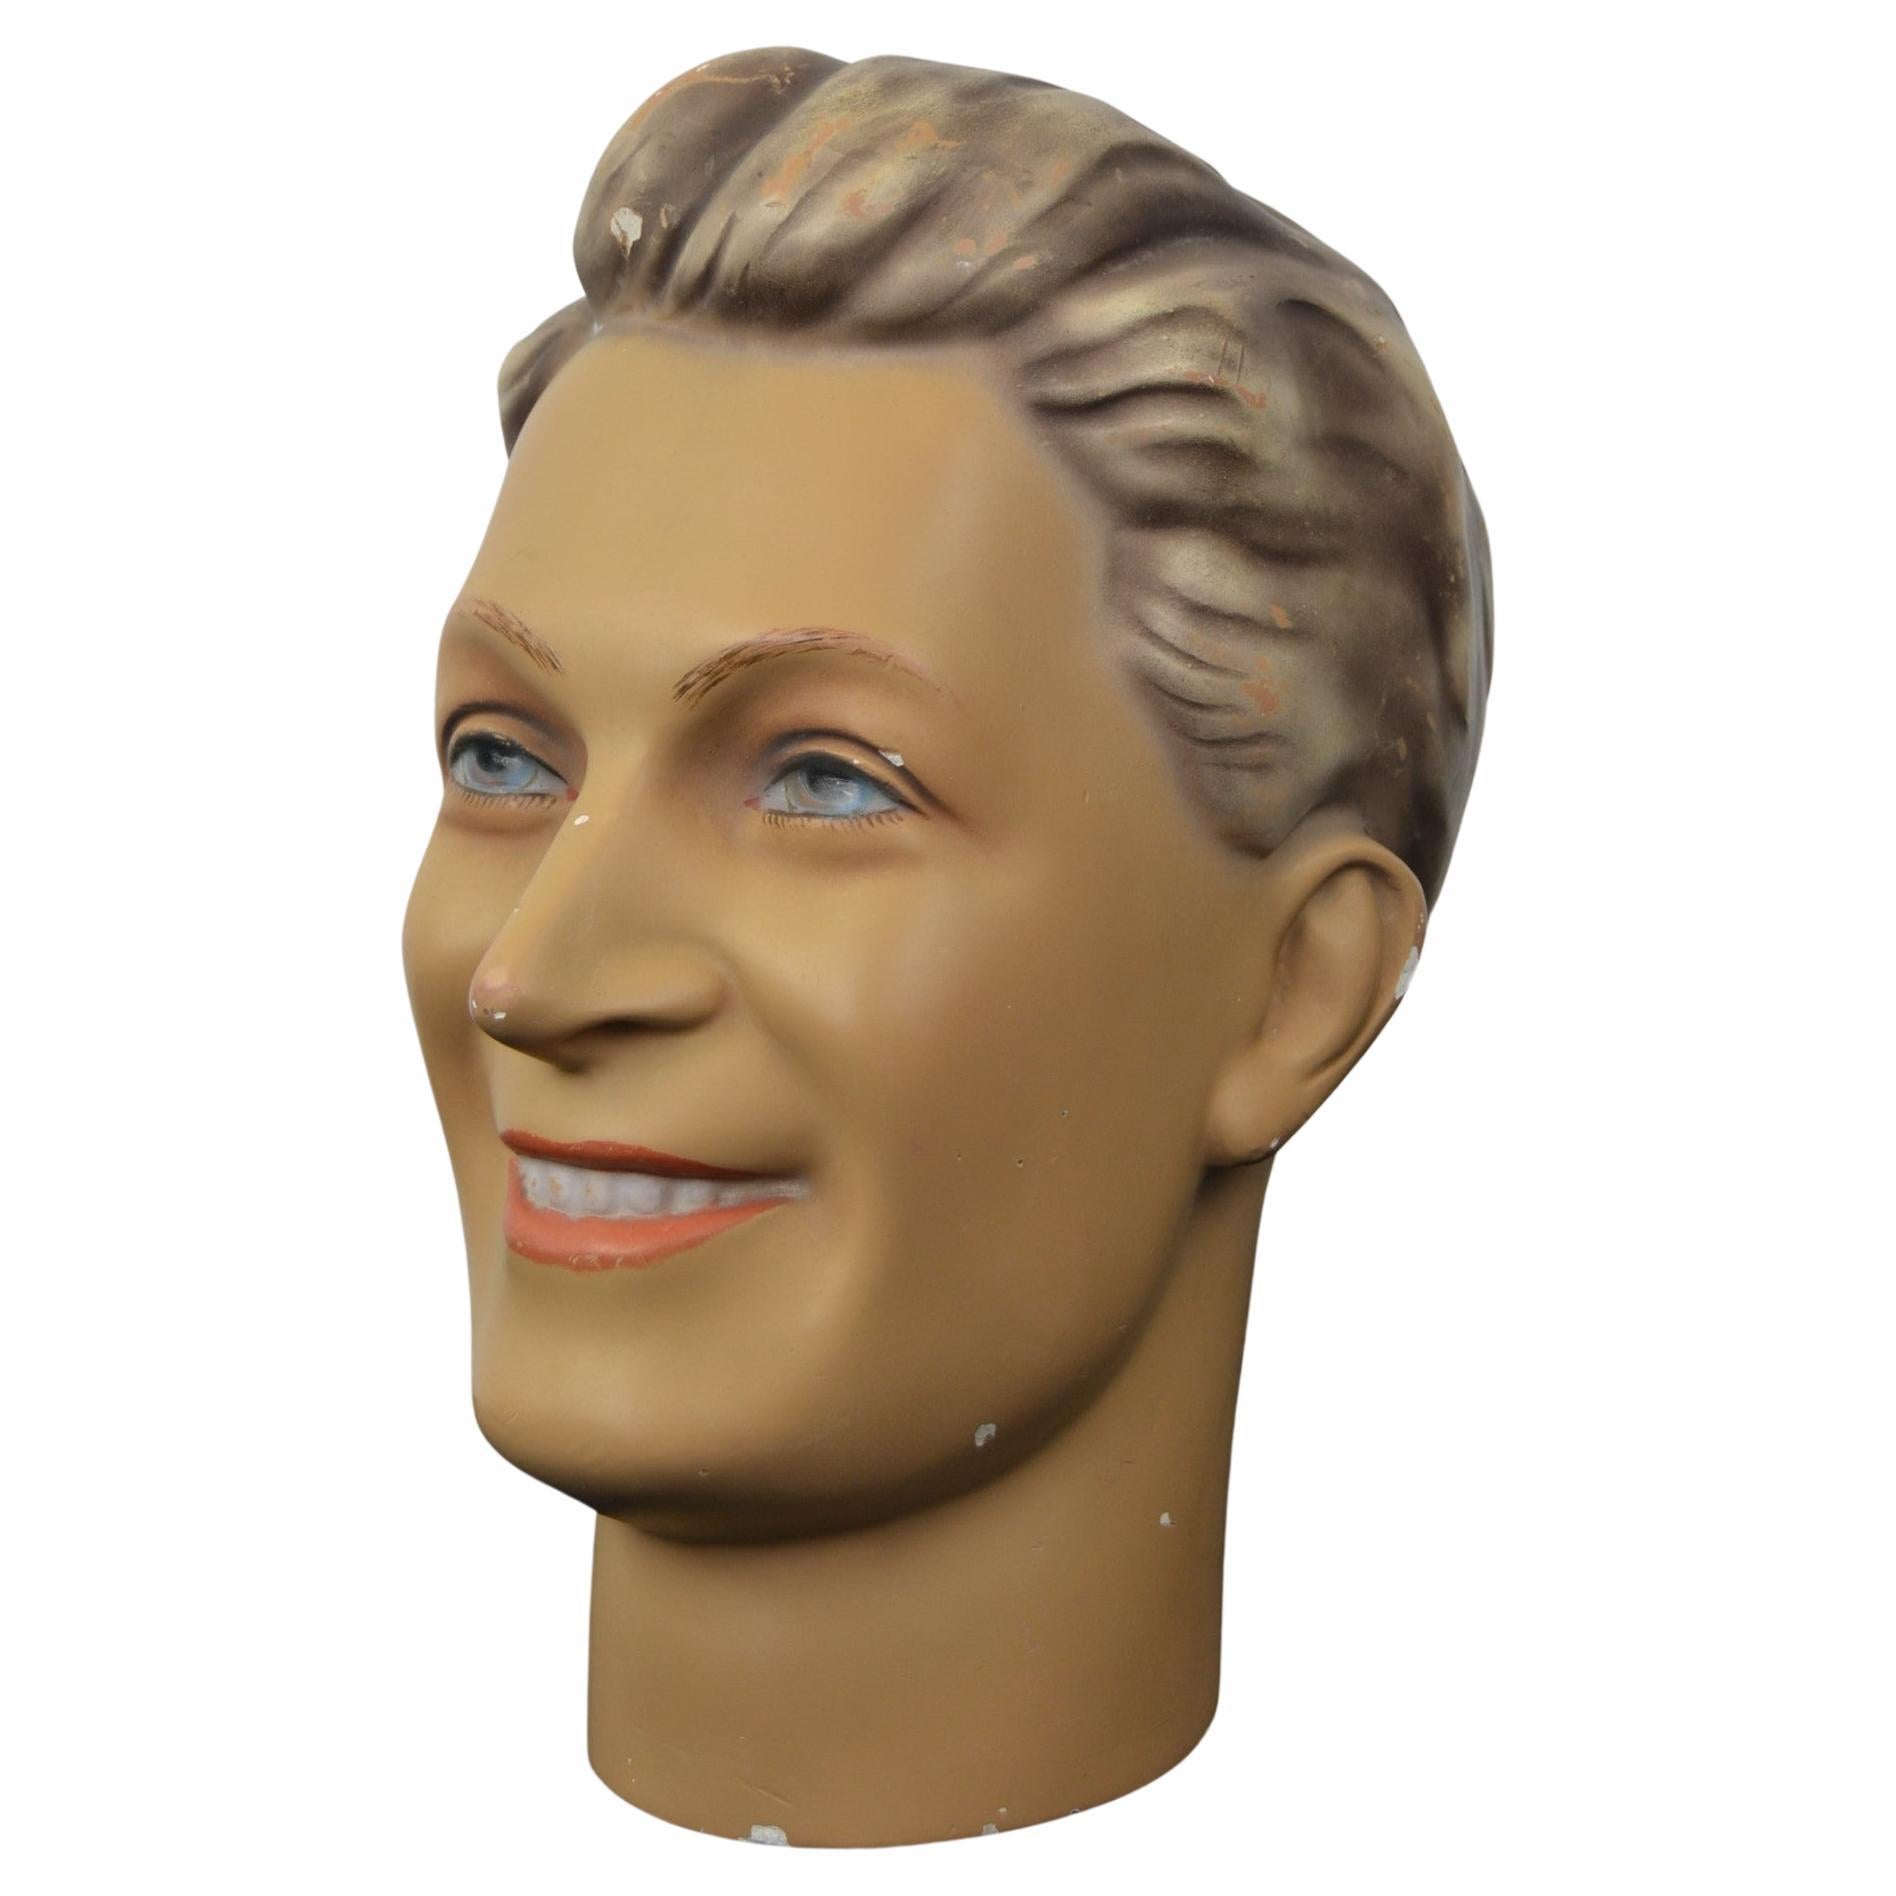 Plaster Male Mannequin Head with Blue Eyes